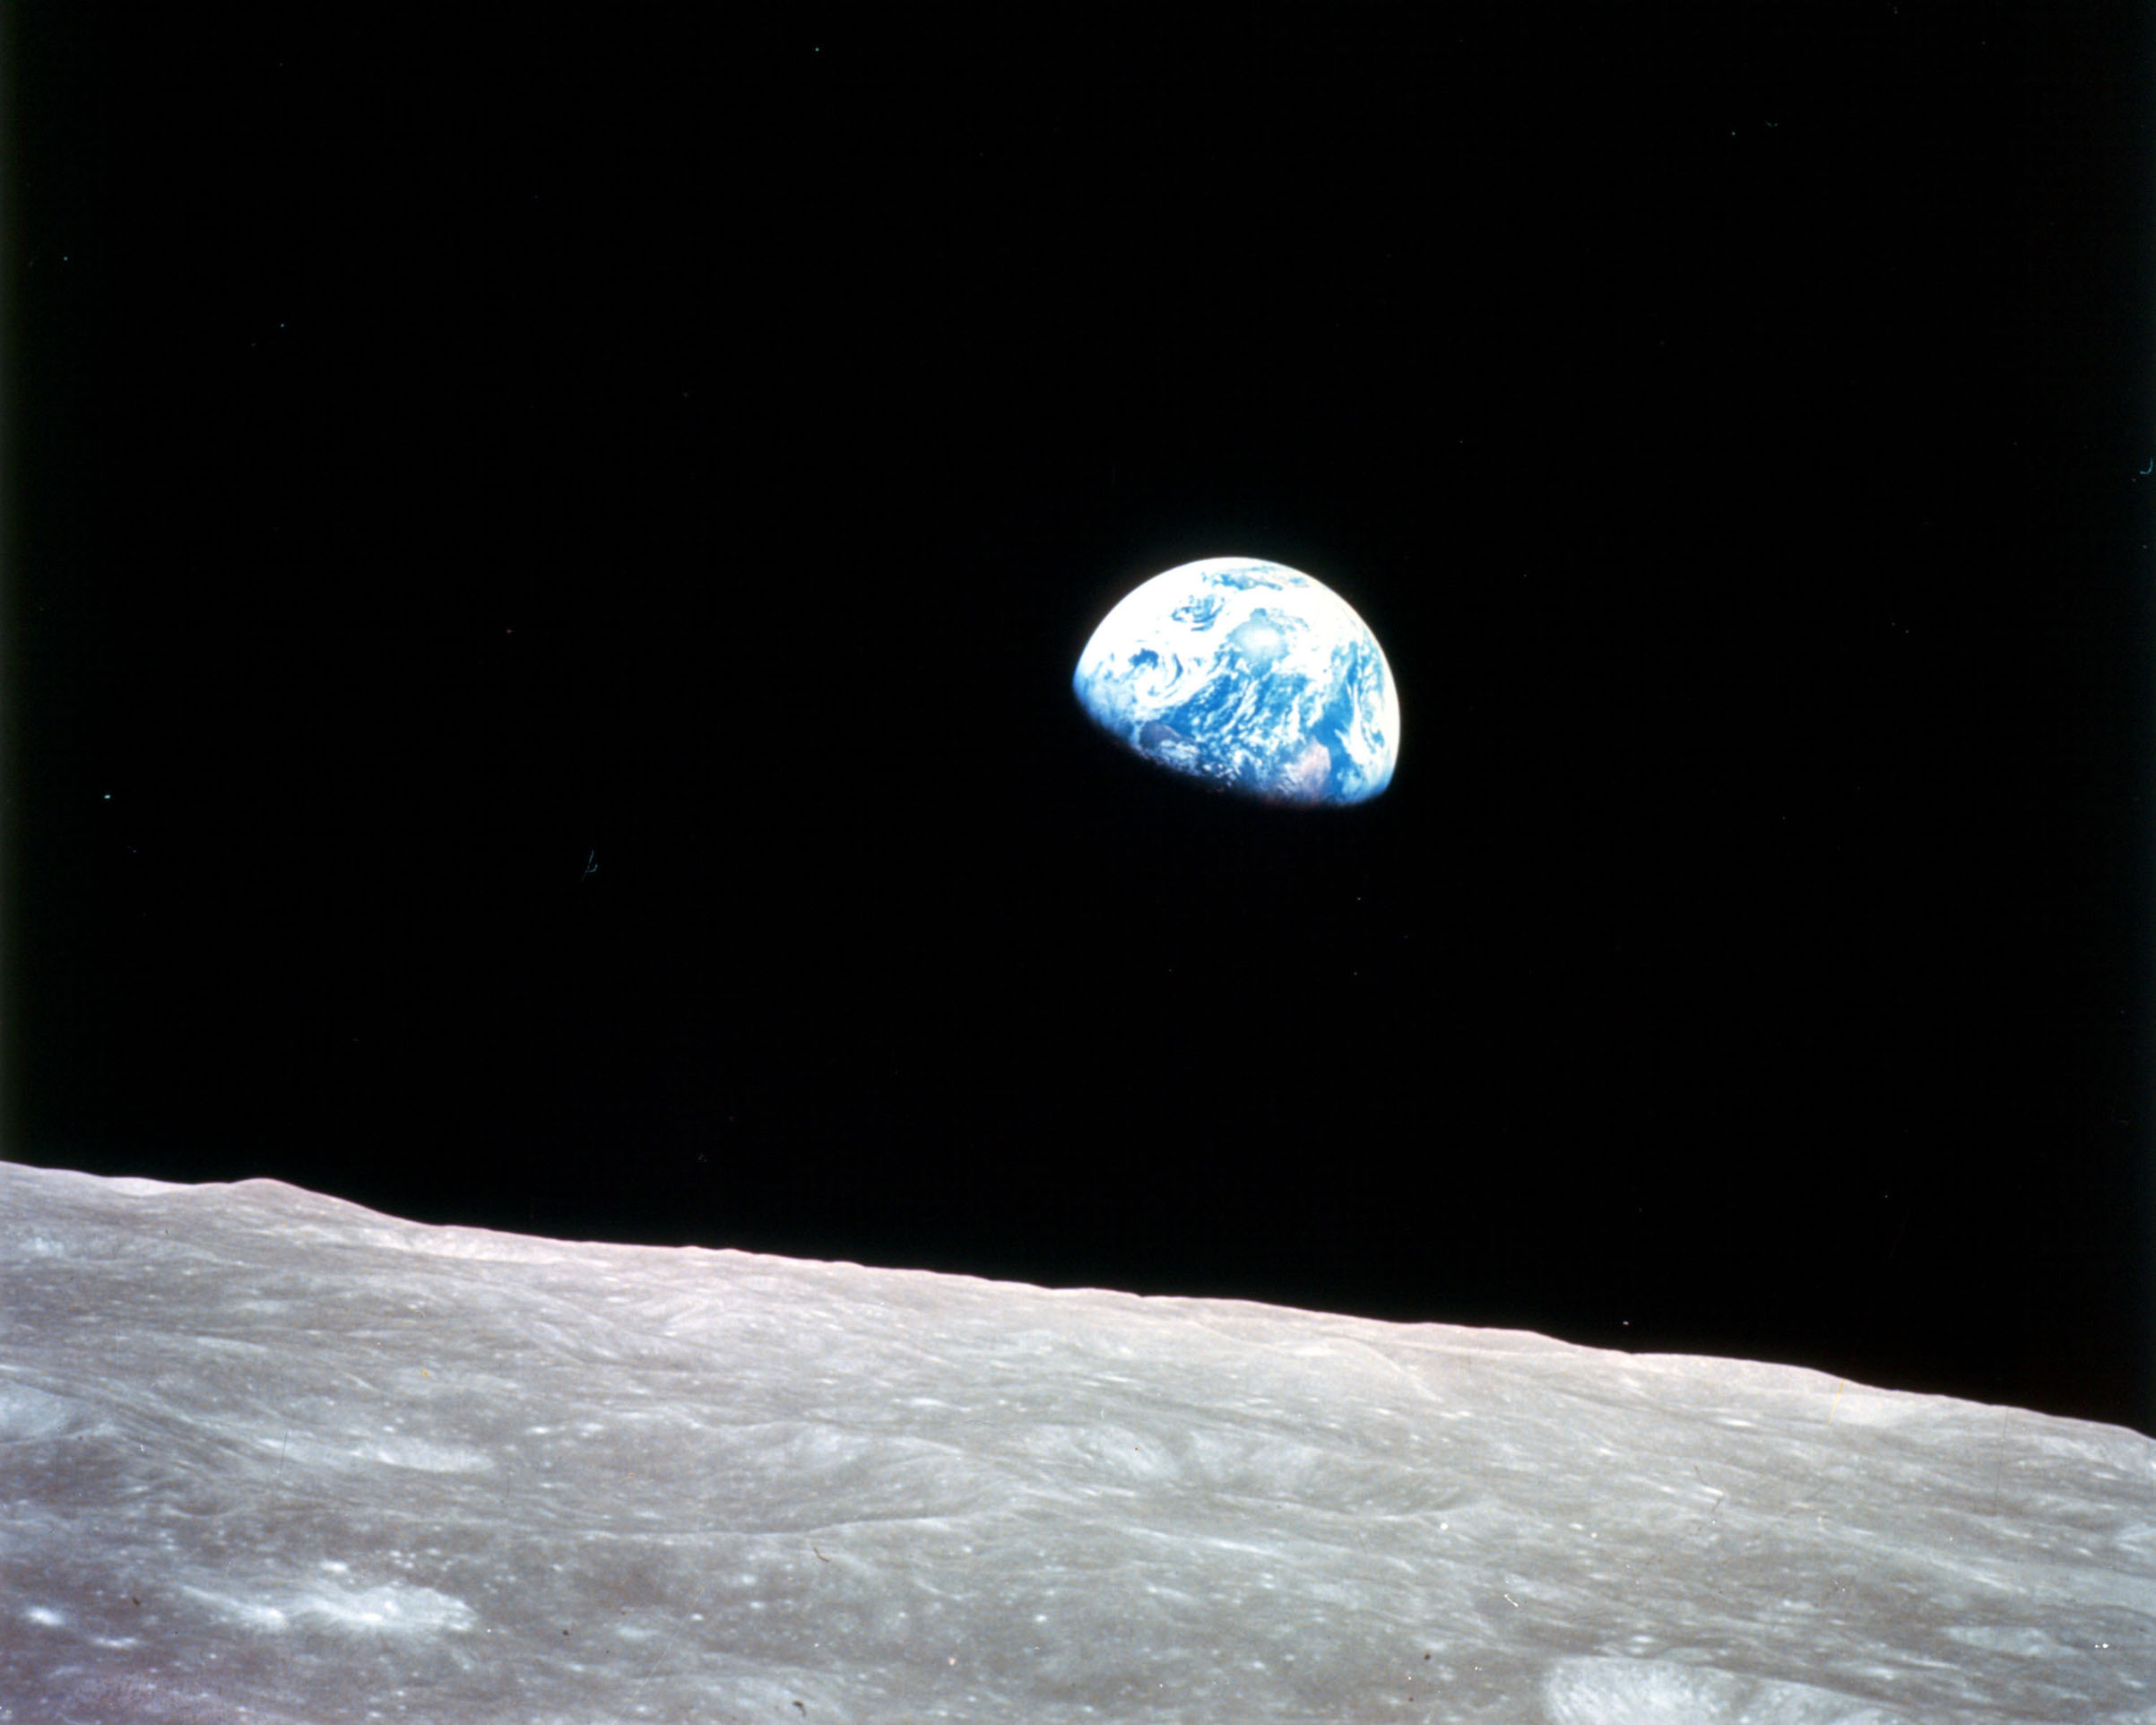 This view of the rising Earth greeted the Apollo 8 astronauts as they came from behind the Moon after the lunar orbit insertion burn. (Science & Society Picture Library / Getty Images)